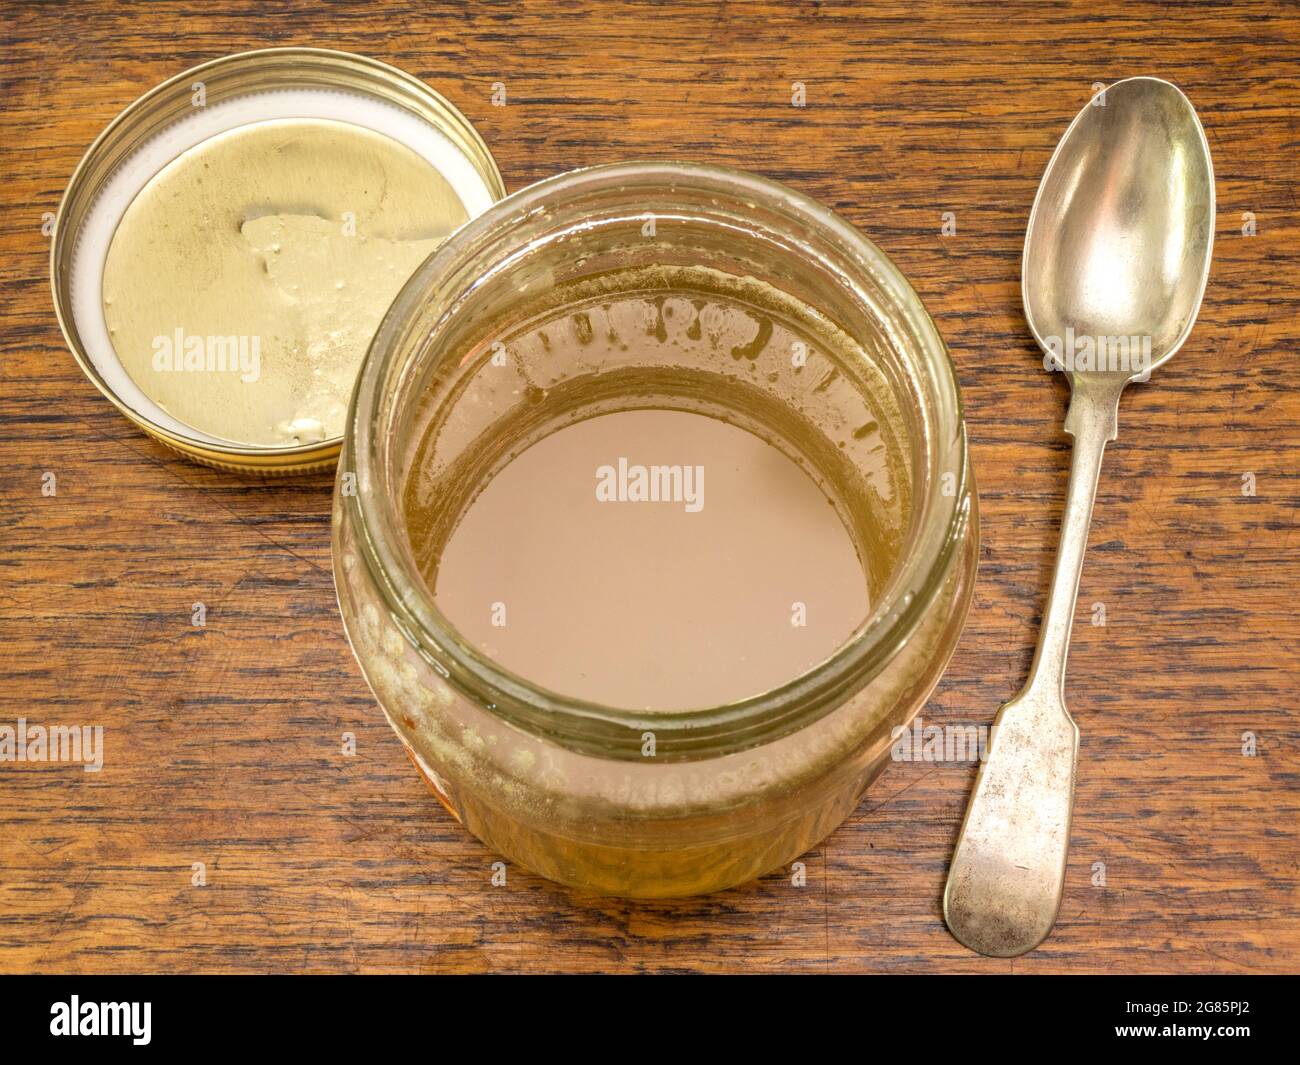 Closeup overhead view of an open product jar of thick pure bee honey, standing on a wooden table, with the lid and a spoon nearby. Stock Photo